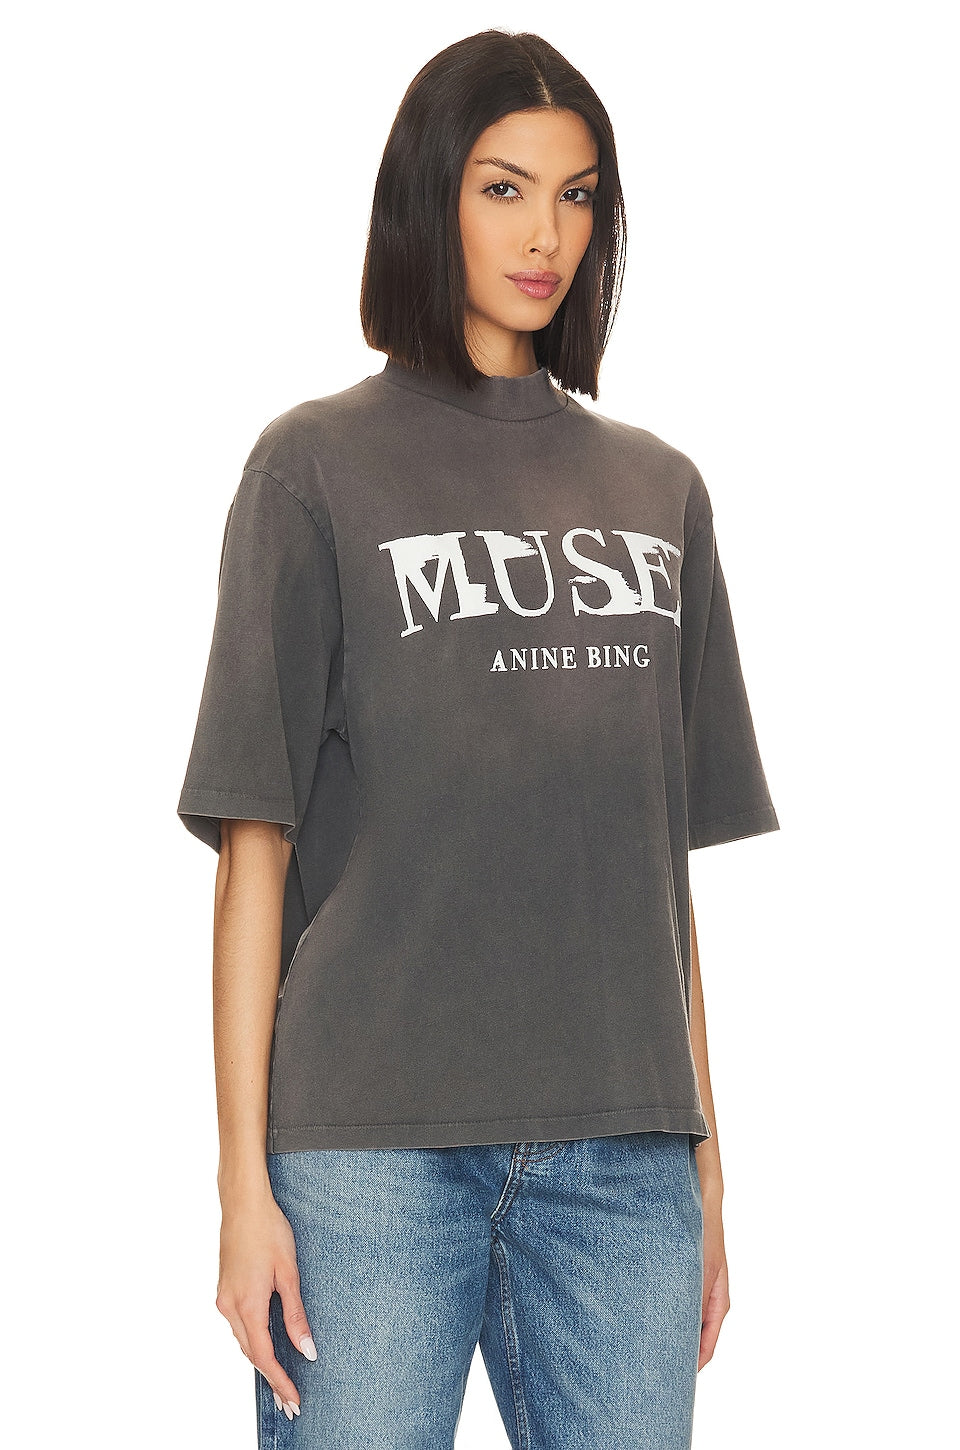 ANINE BING Wes Tee Painted Muse in Washed Faded Black Size Small